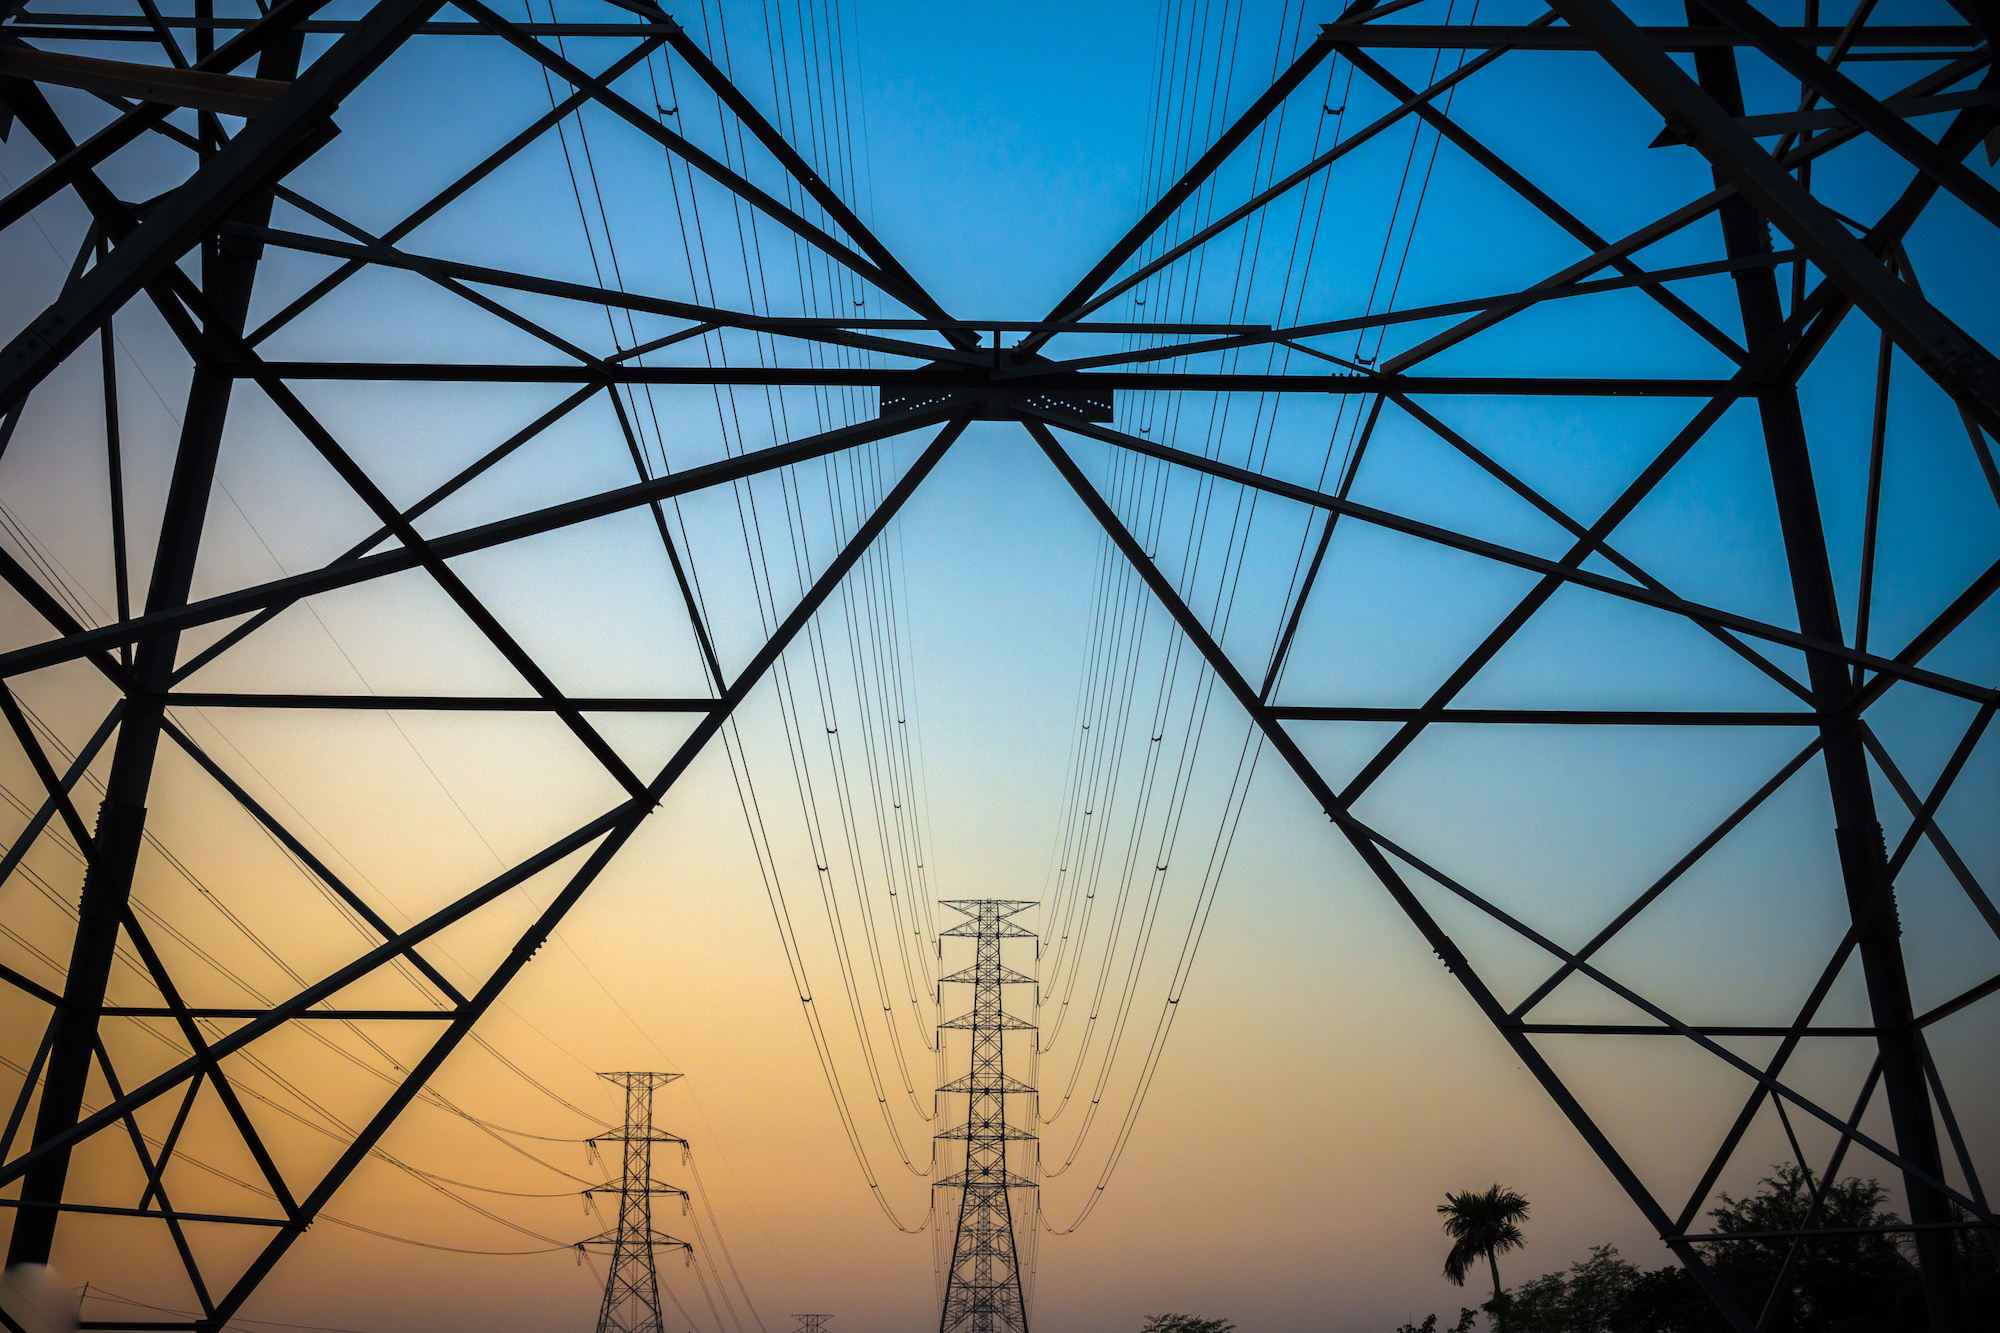 The #1 Tool to Lower Operational Risk for Utilities (According to Industry Leaders)